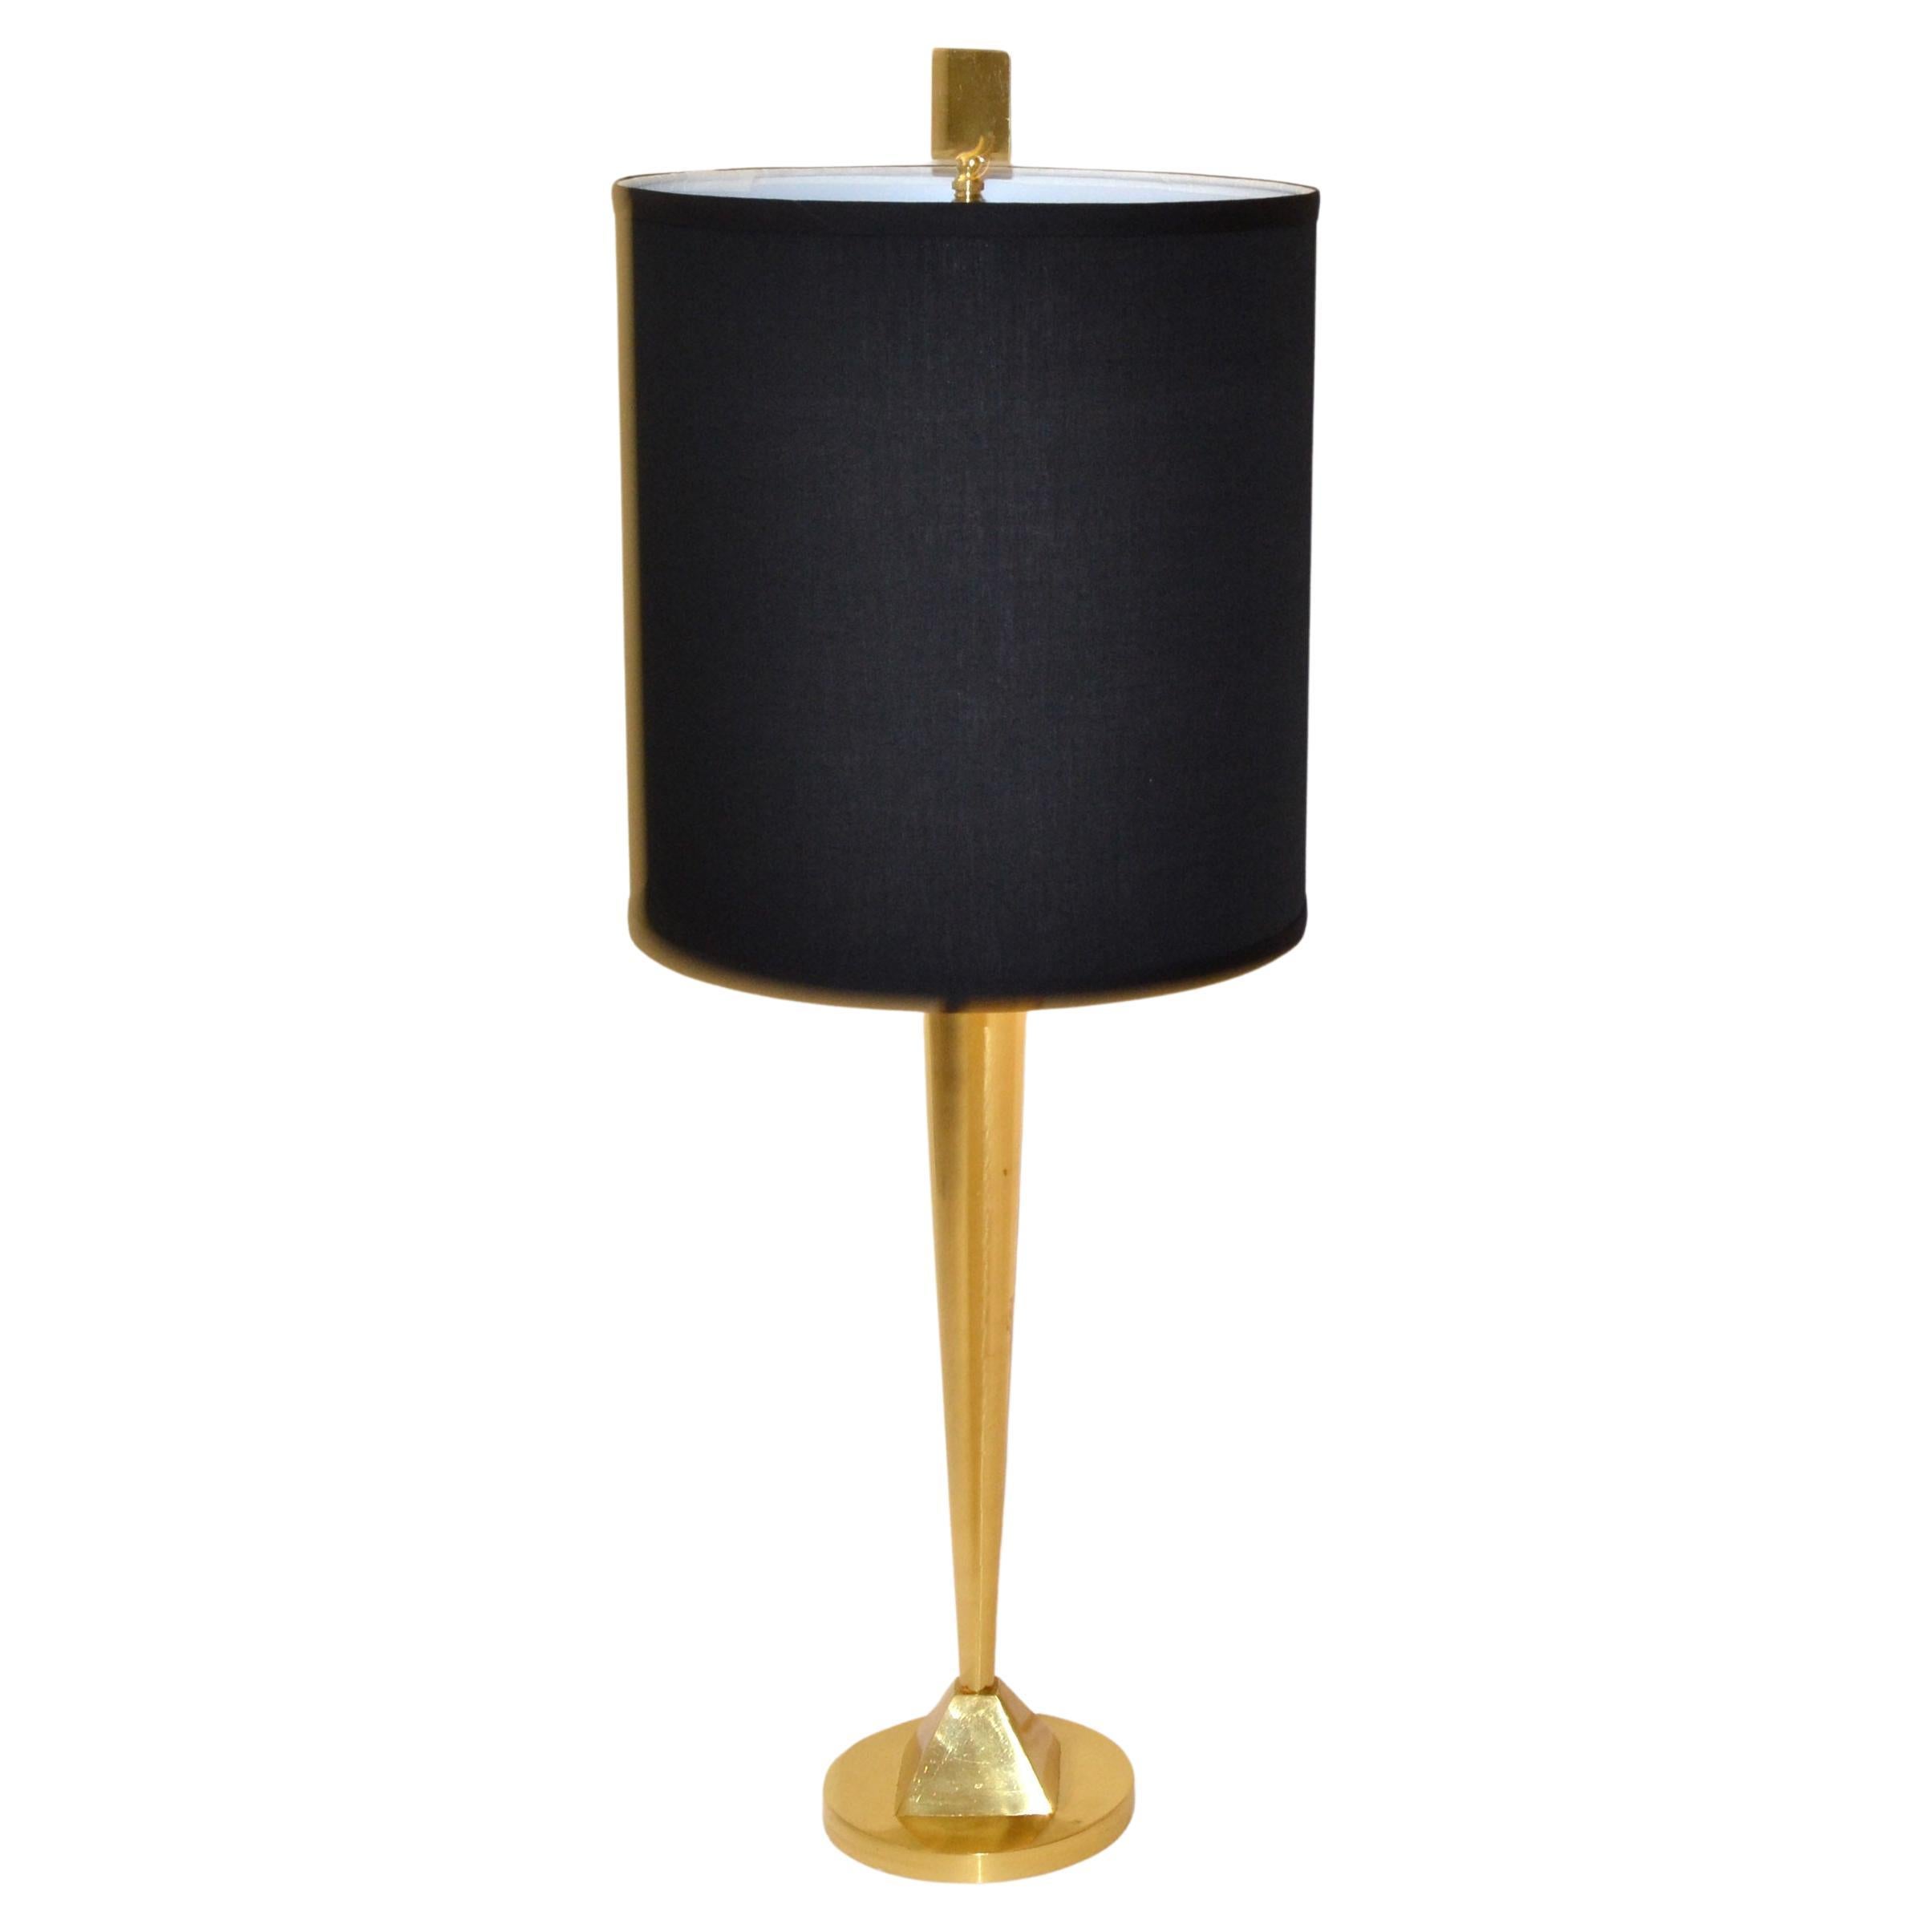 Late 20th Century Solid Brass Geometric Tall Table Lamp Black Fabric Drum Shade For Sale